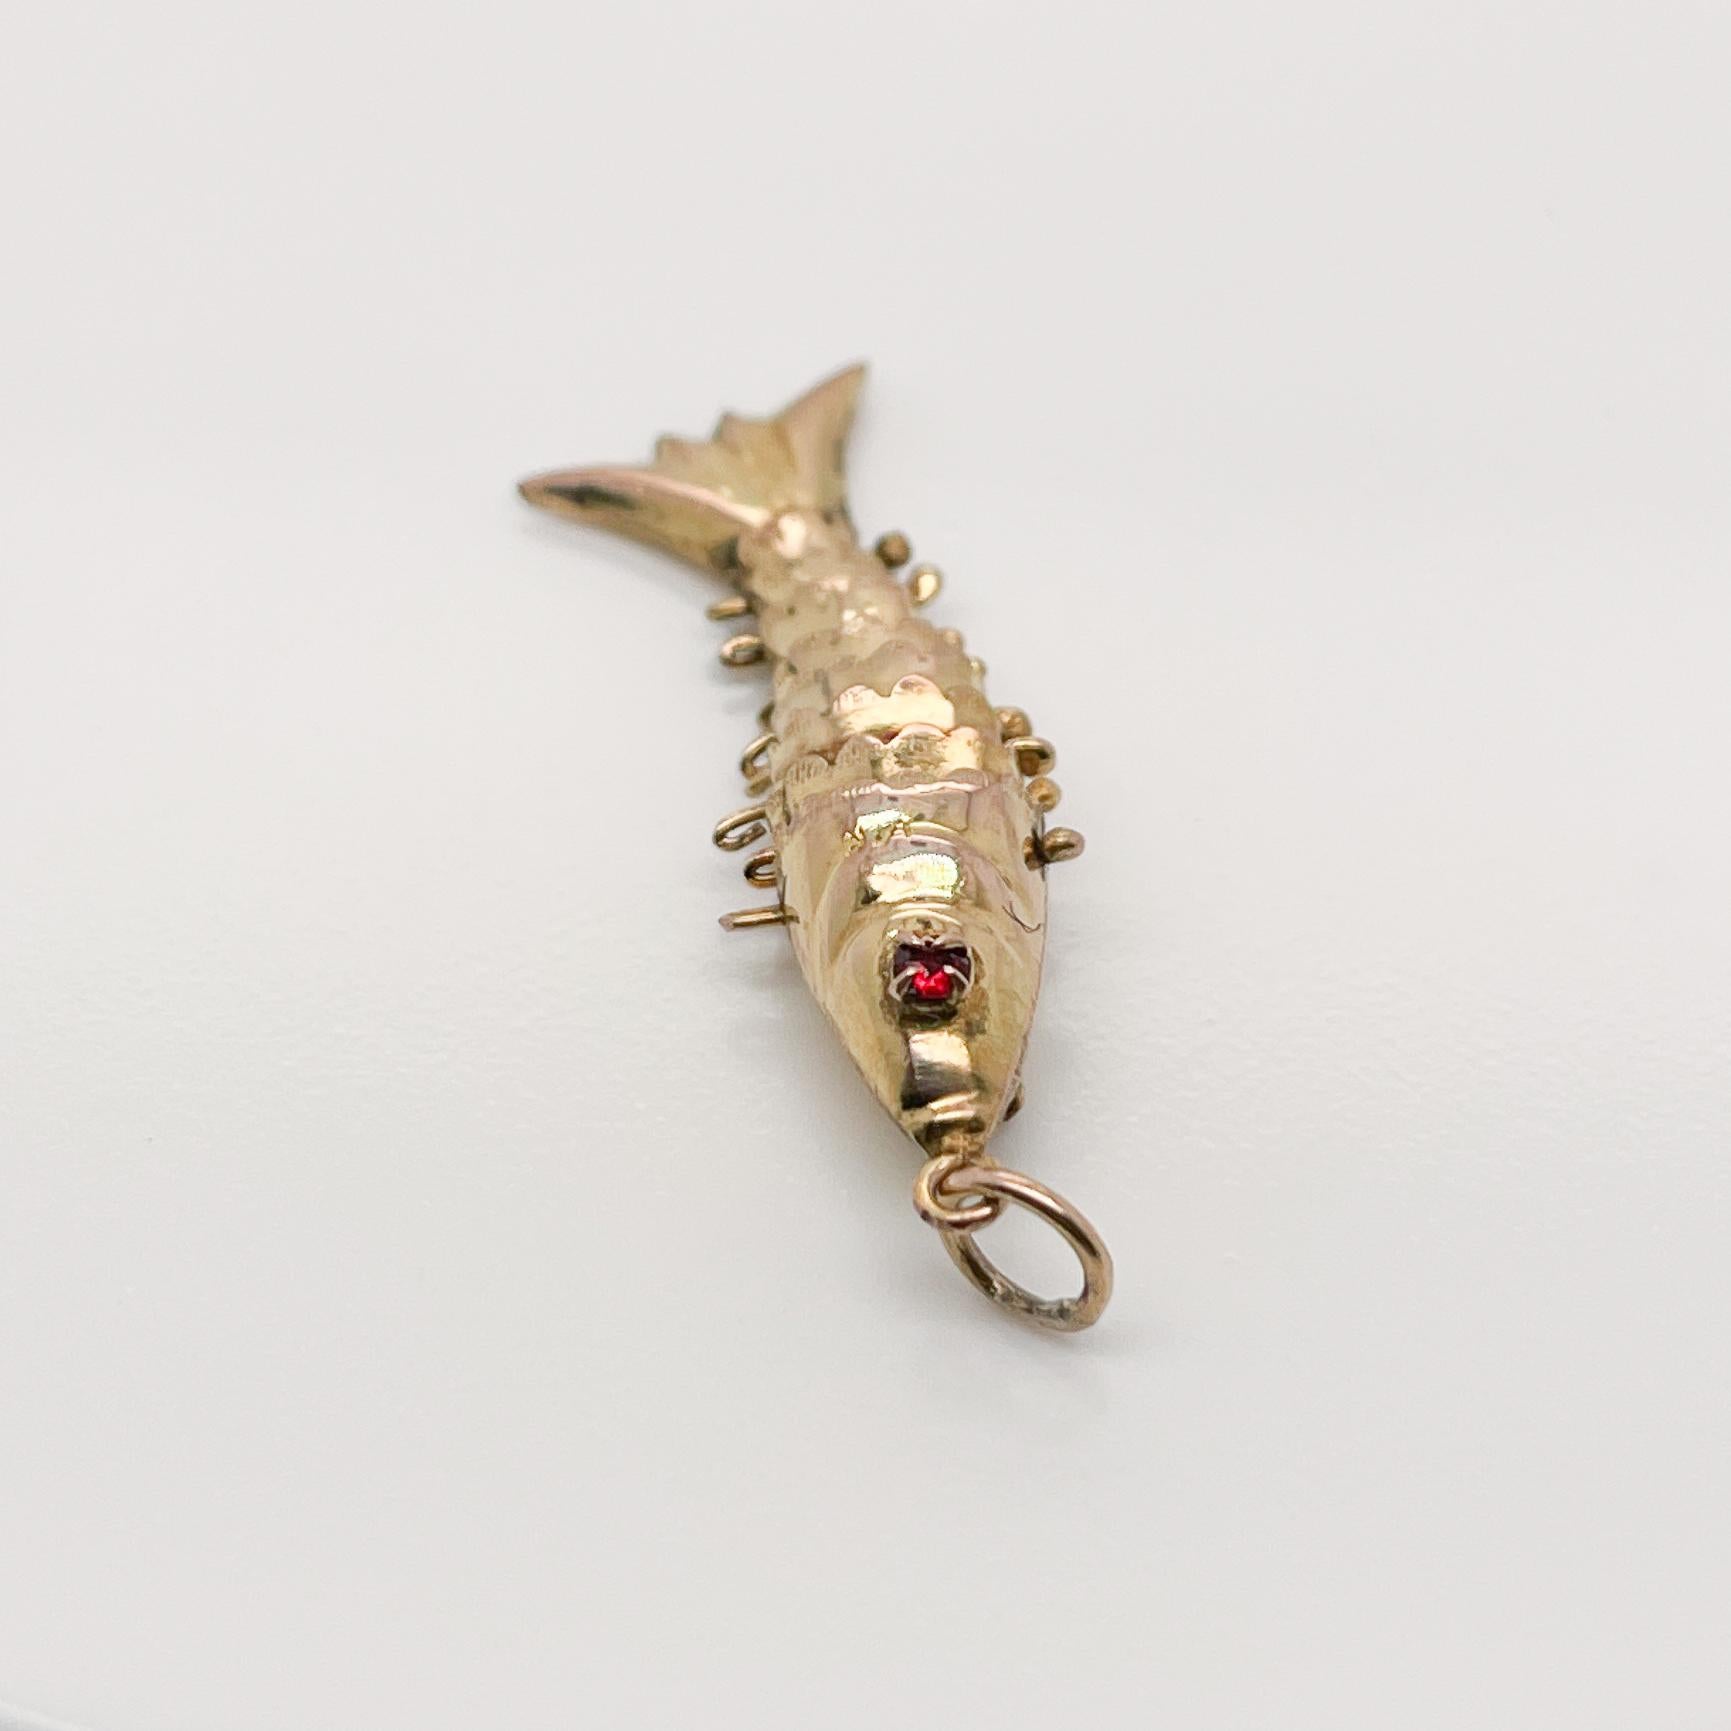 Round Cut 14k Gold Articulated Fish with Garnet Gemstone Eyes Charm for a Bracelet